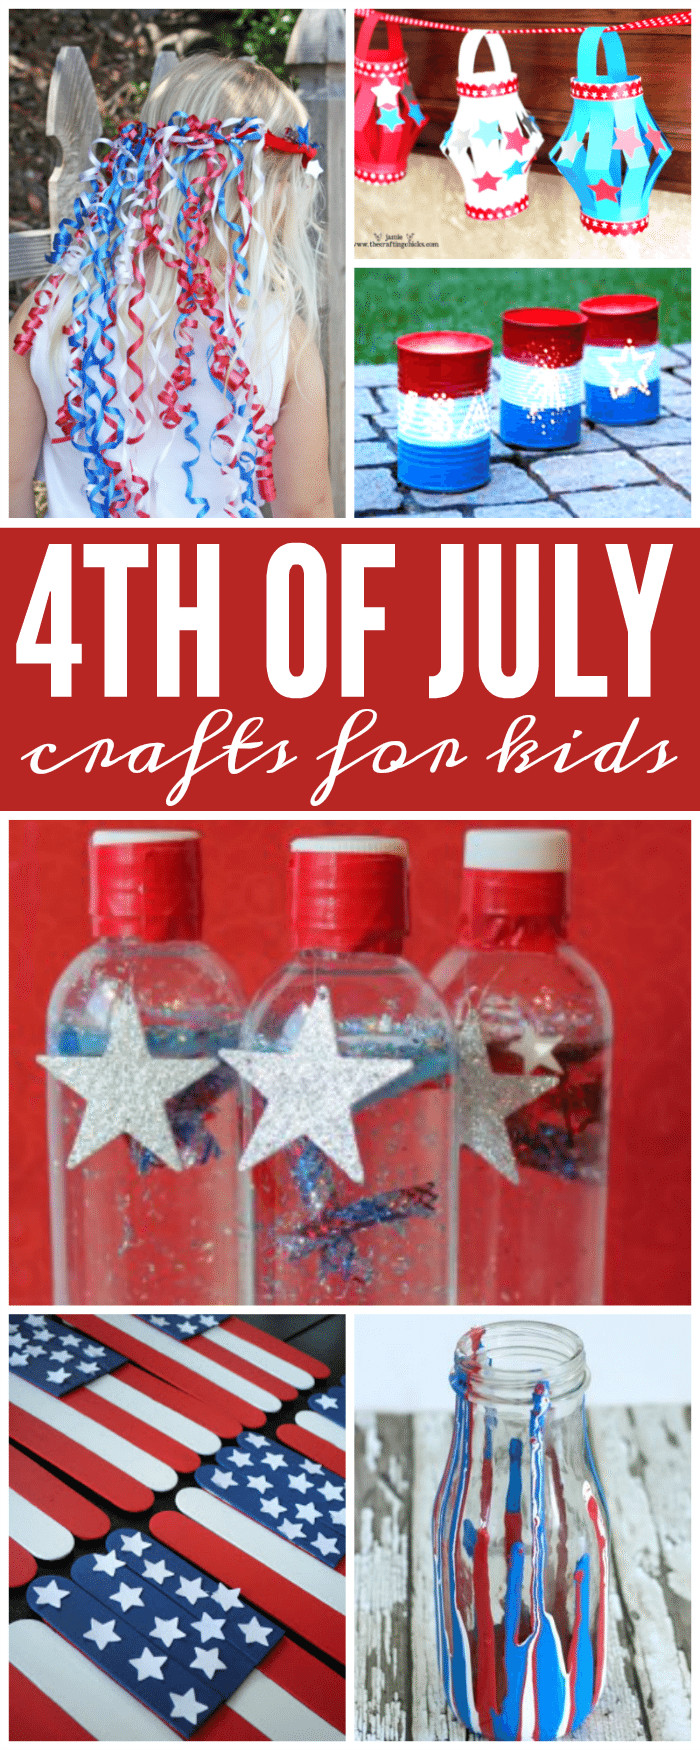 Fourth Of July Crafts For Toddlers
 4th of July Crafts for Kids